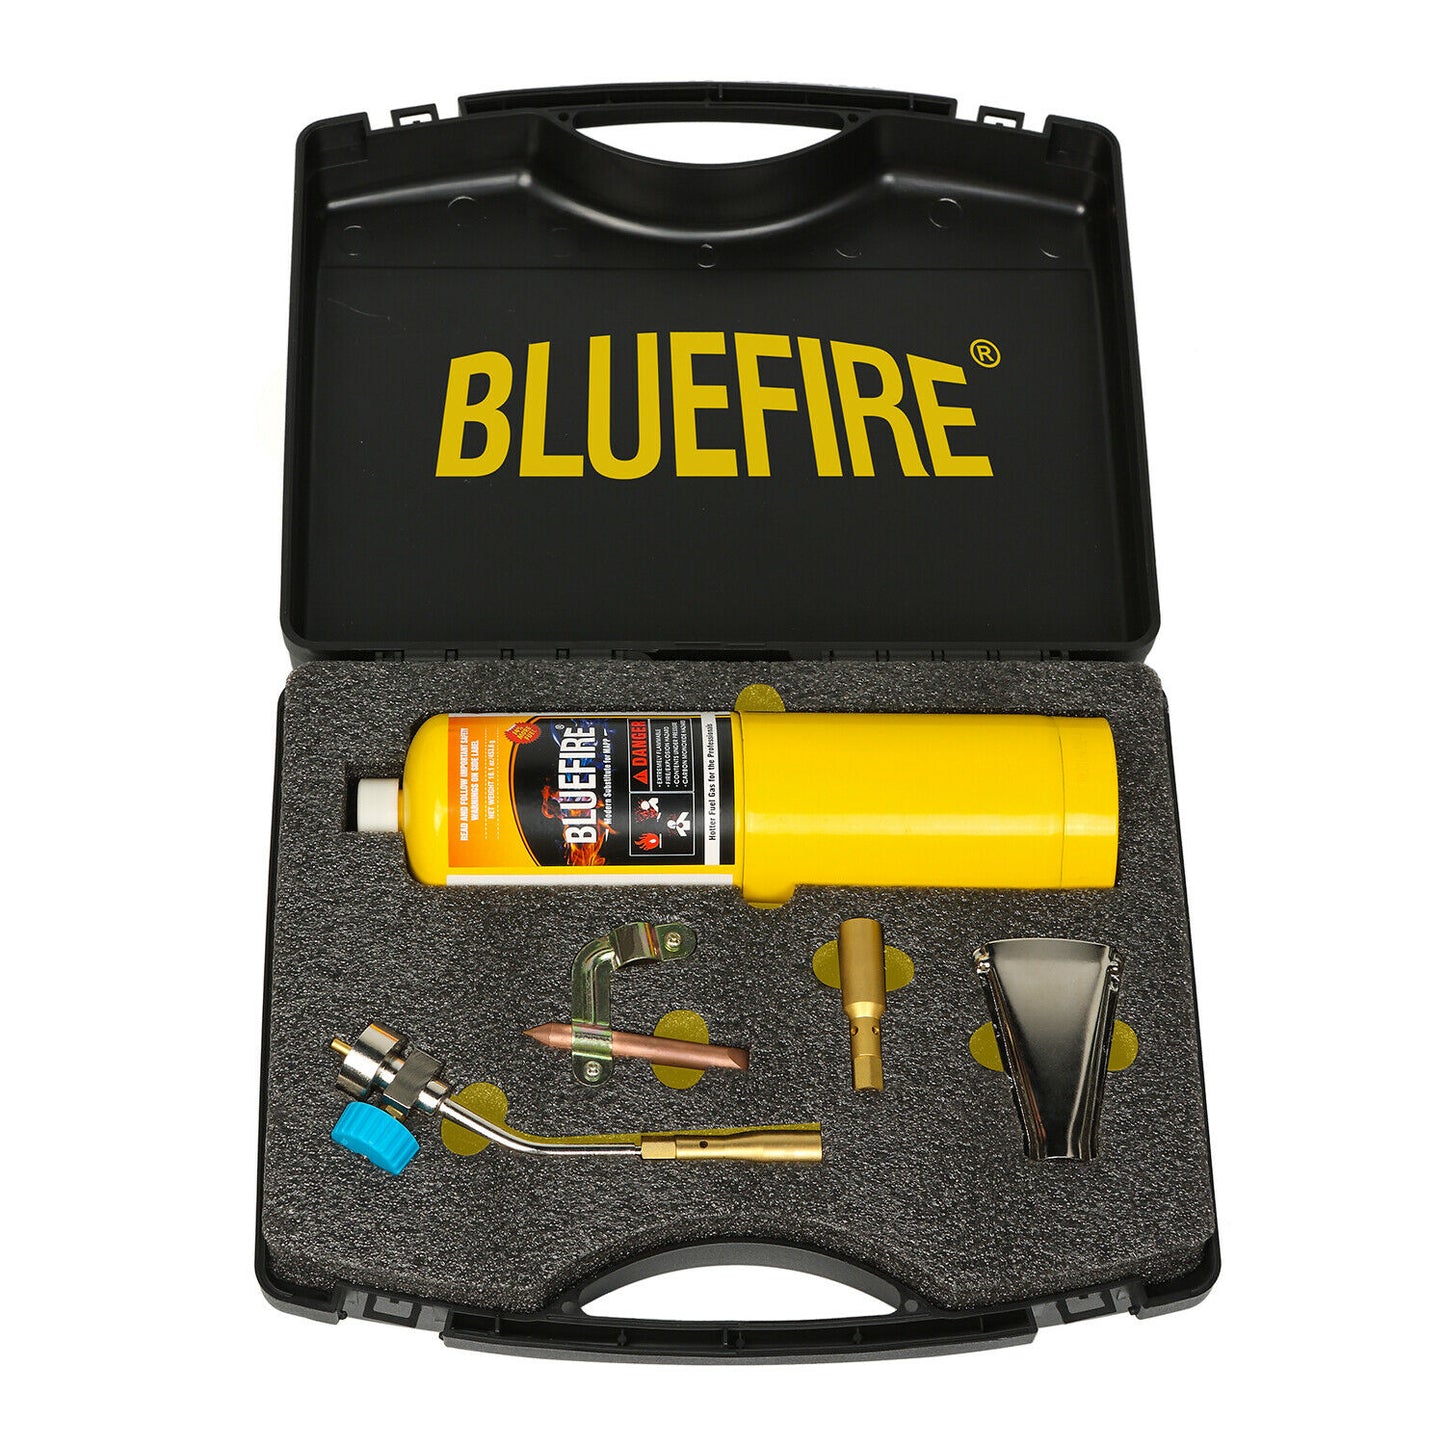 ‎BTM-7020-K Solid Brass Pencil Flame Gas Welding Torch Head with MAPP gas Kit